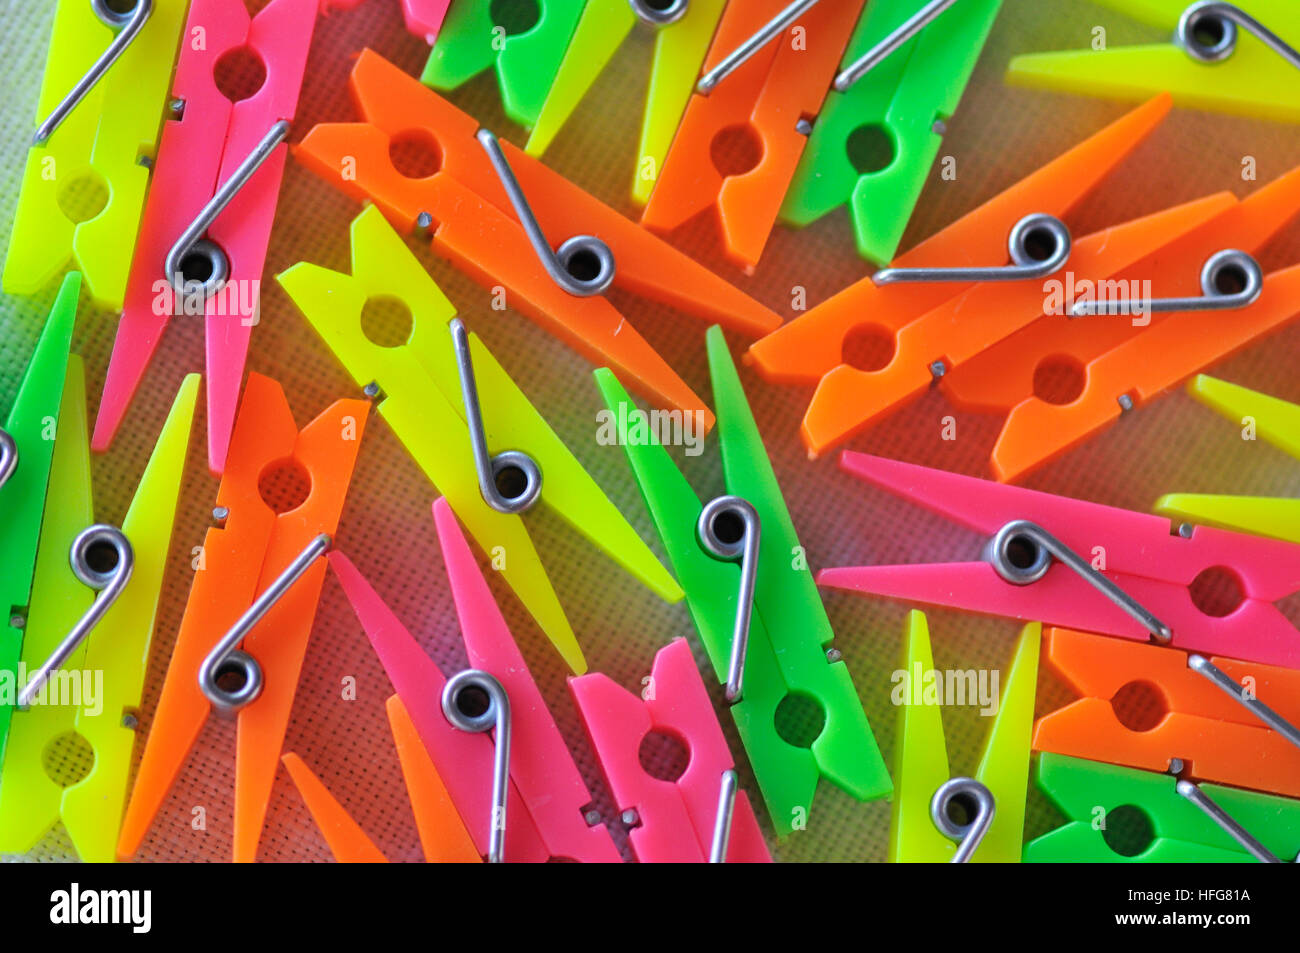 Plastic clothes pegs Stock Photo